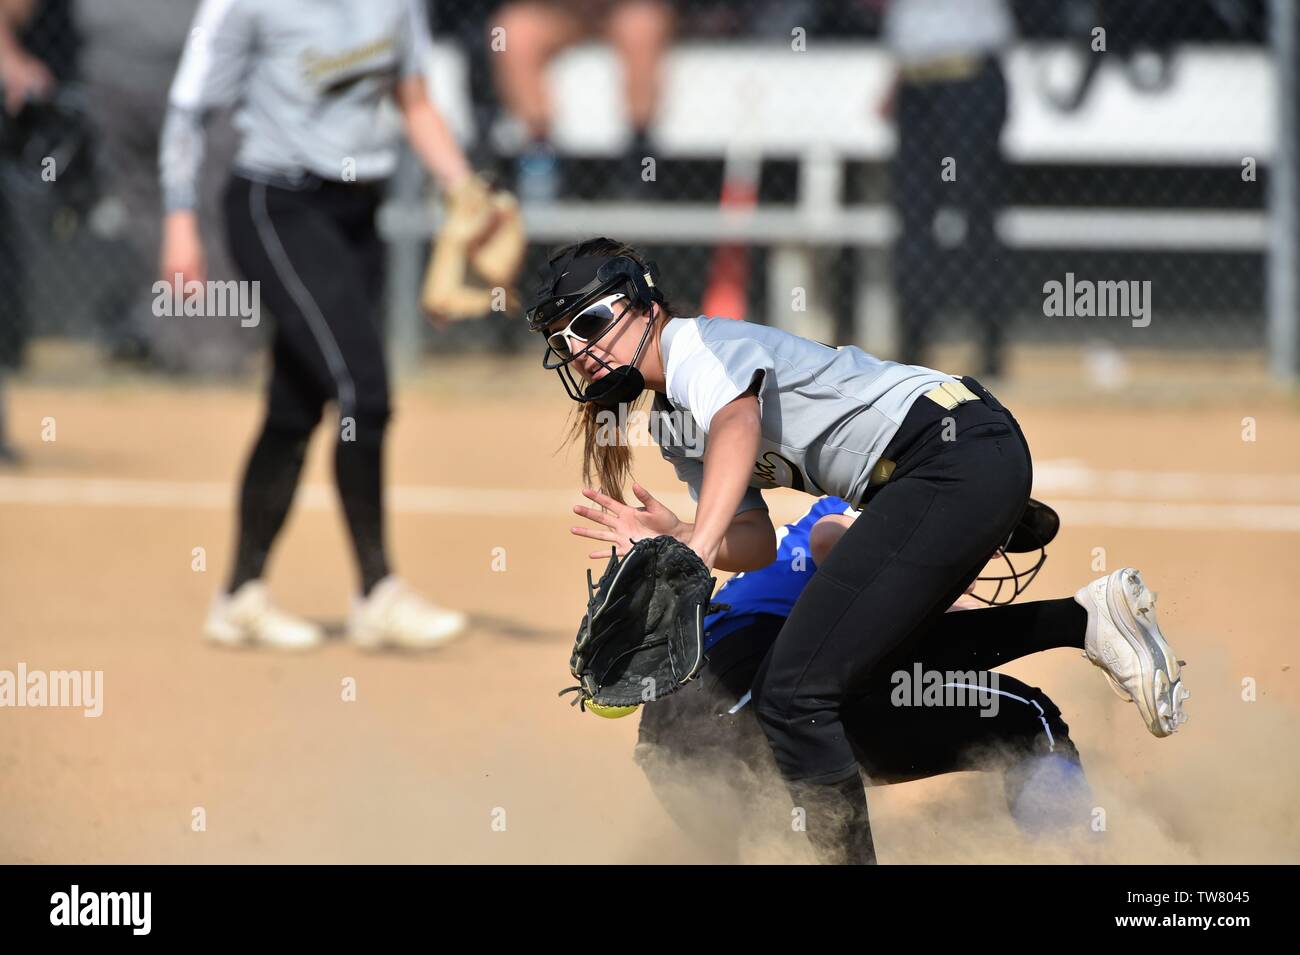 Infielder is unable to secure a throw from the outfield as opposing  runner was sliding safely into second base with a double. USA. Stock Photo